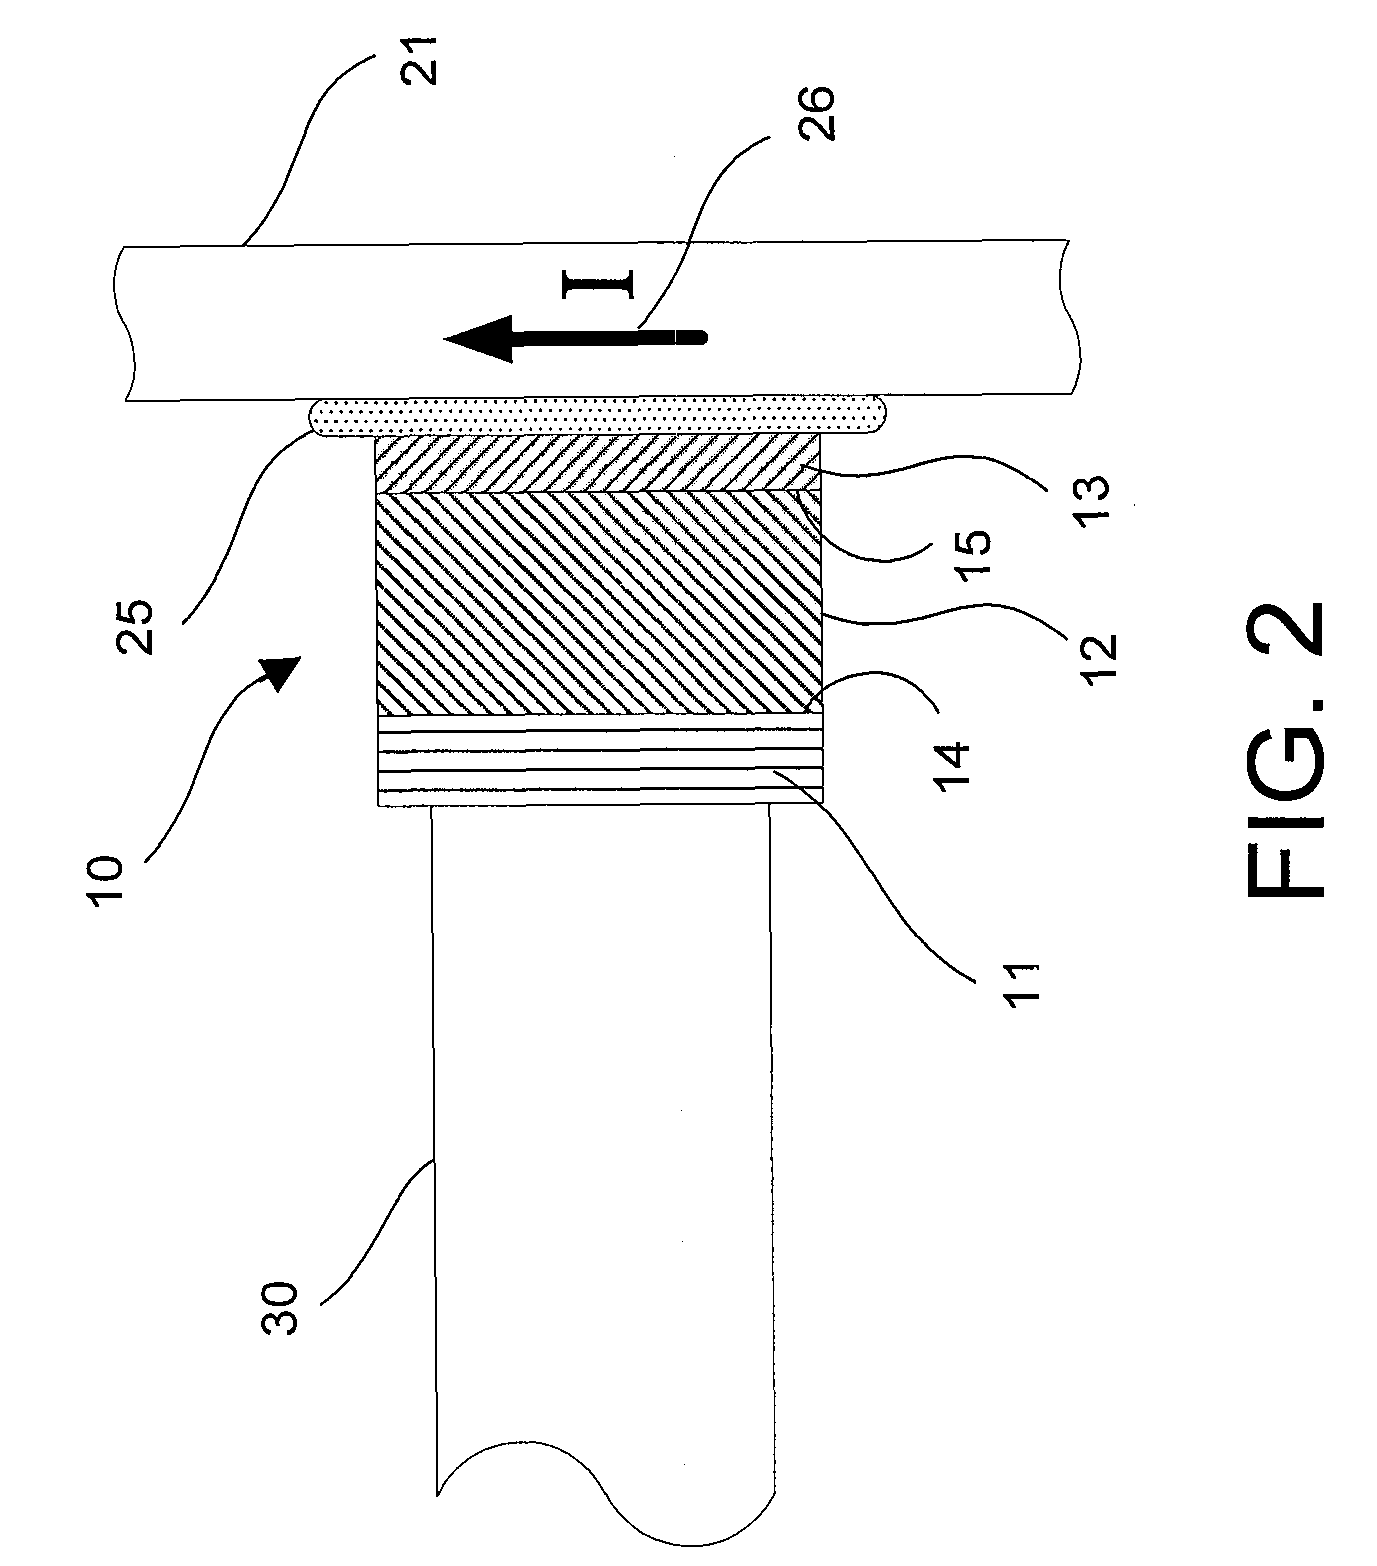 Optical sensor for monitoring electrical current or power